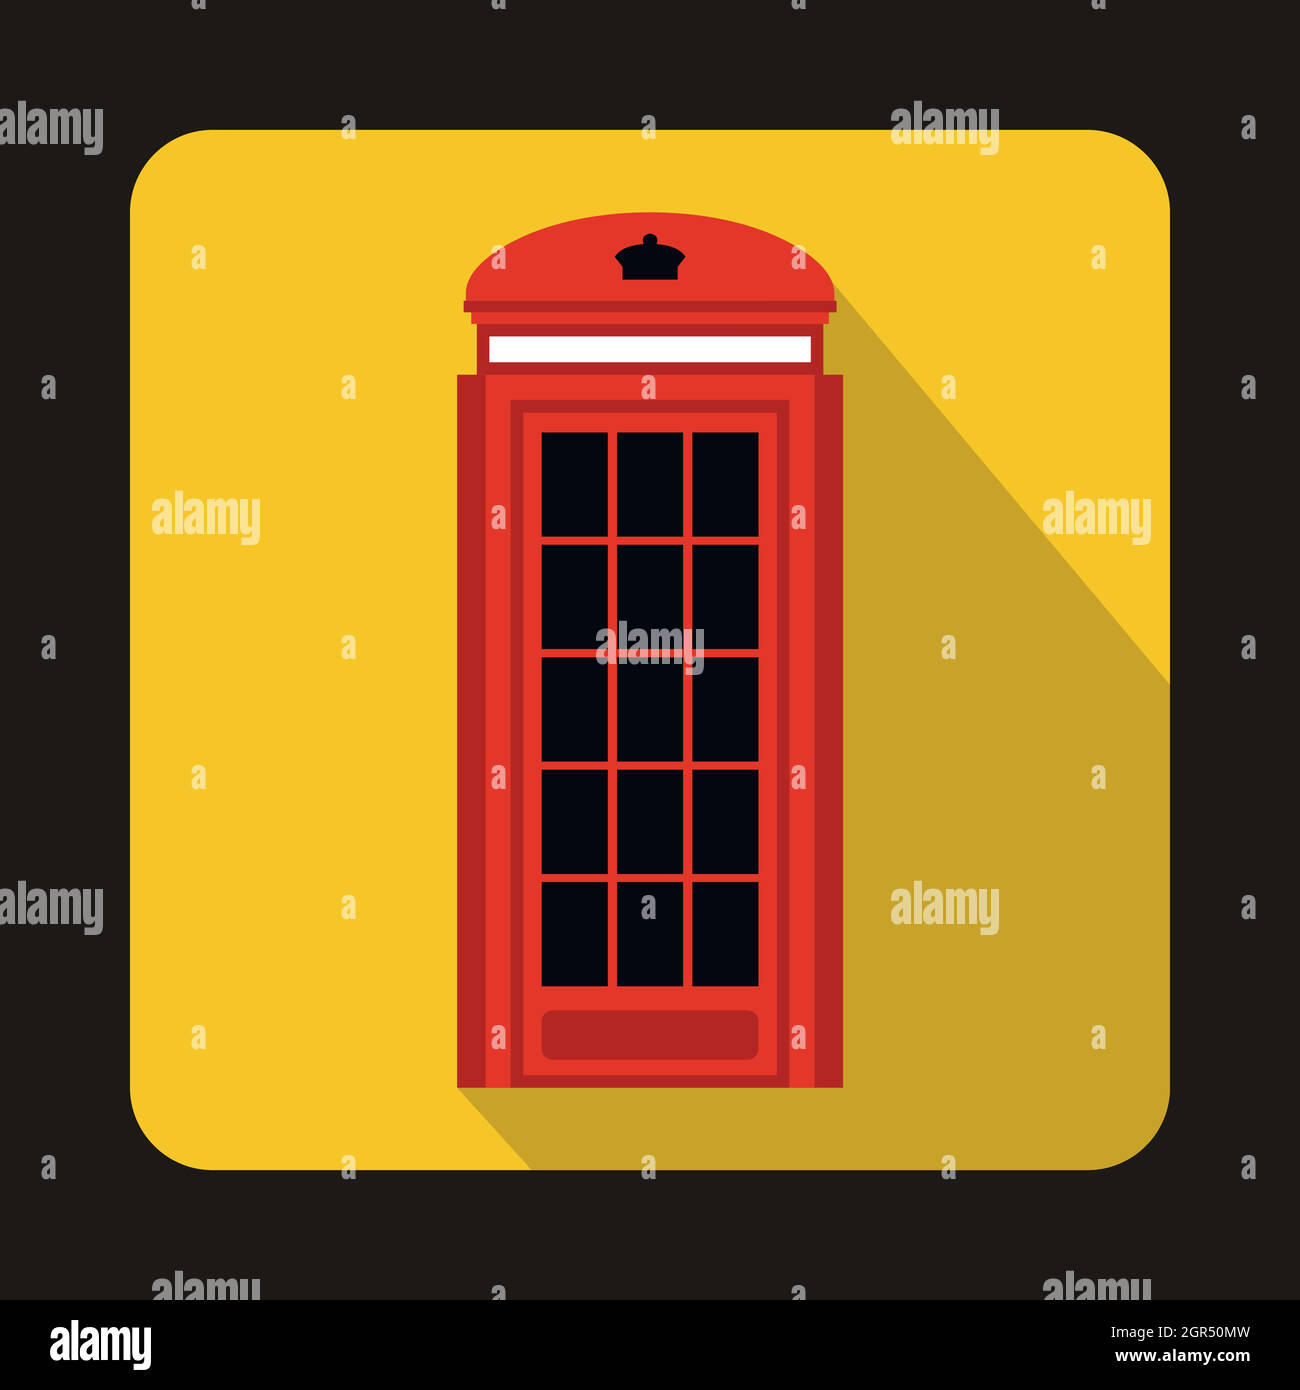 London double decker red bus icon, flat style Stock Vector